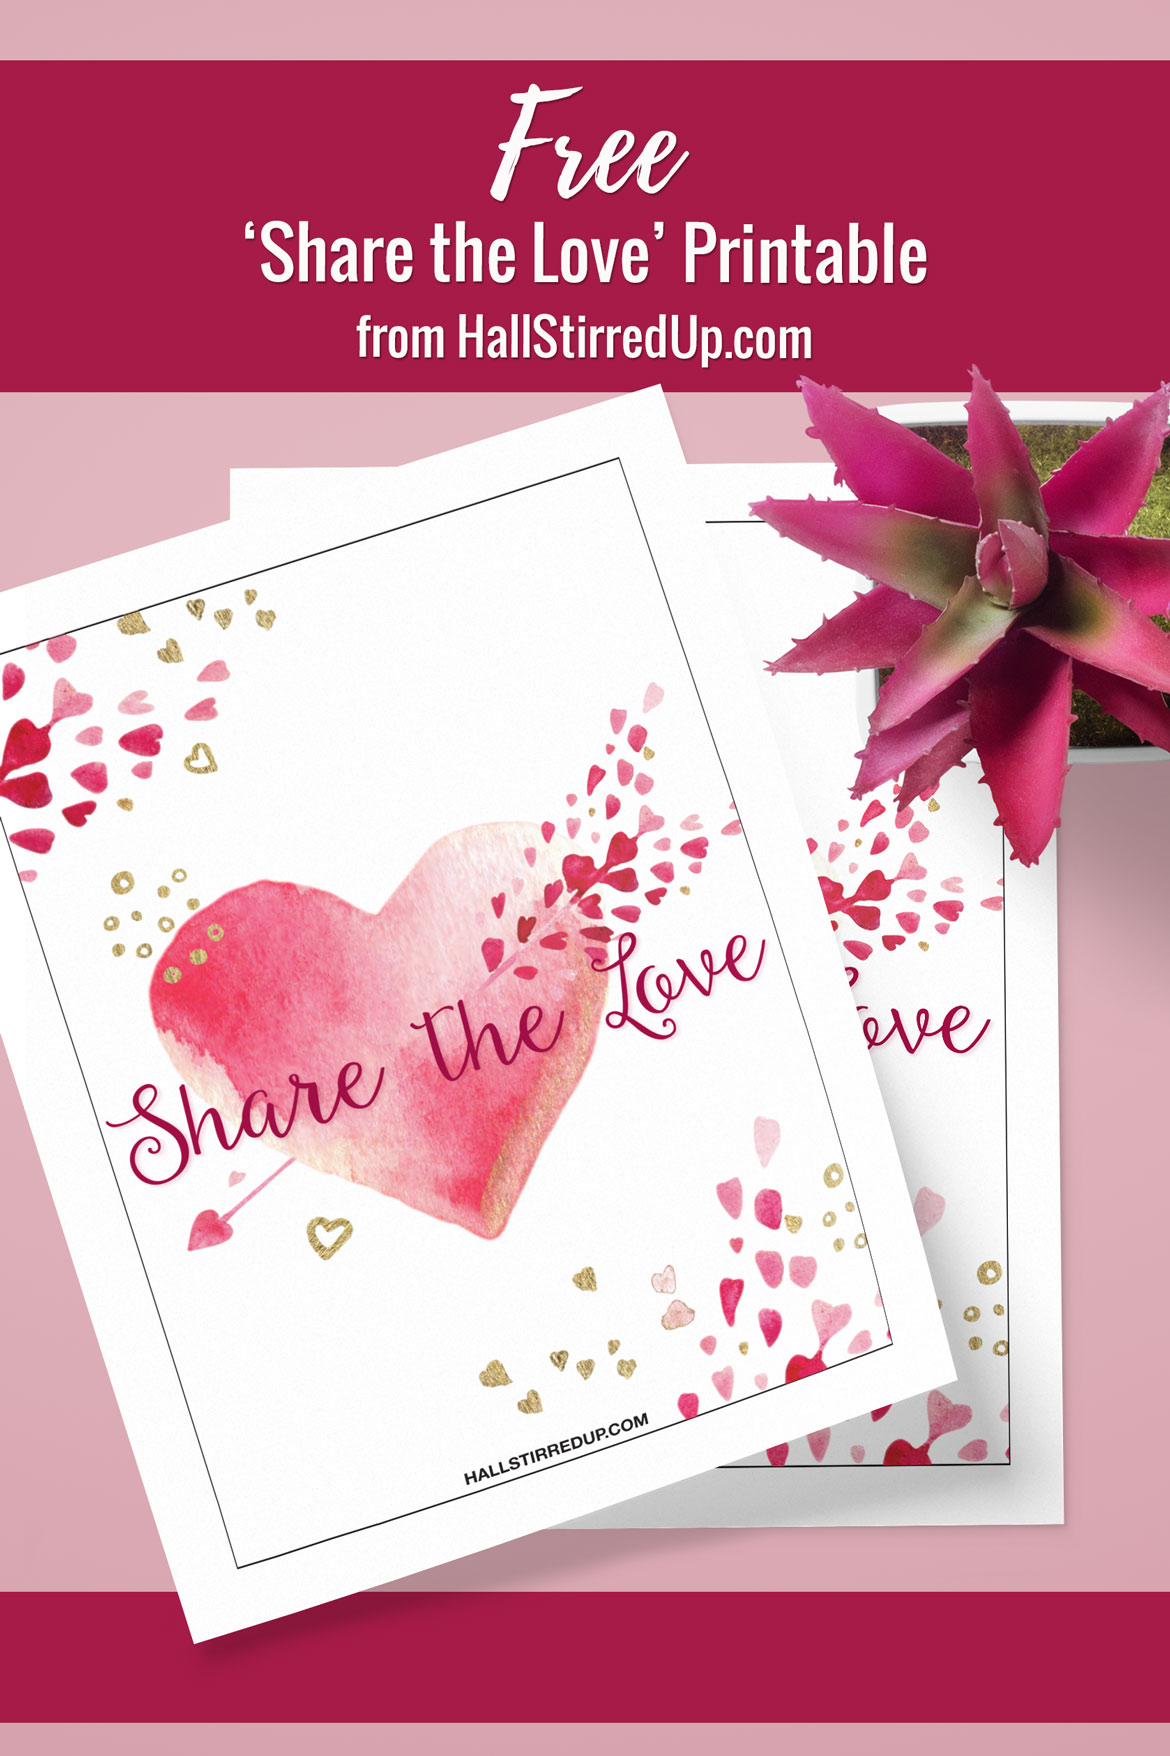 Share the Love with a pretty Valentines Day free printable